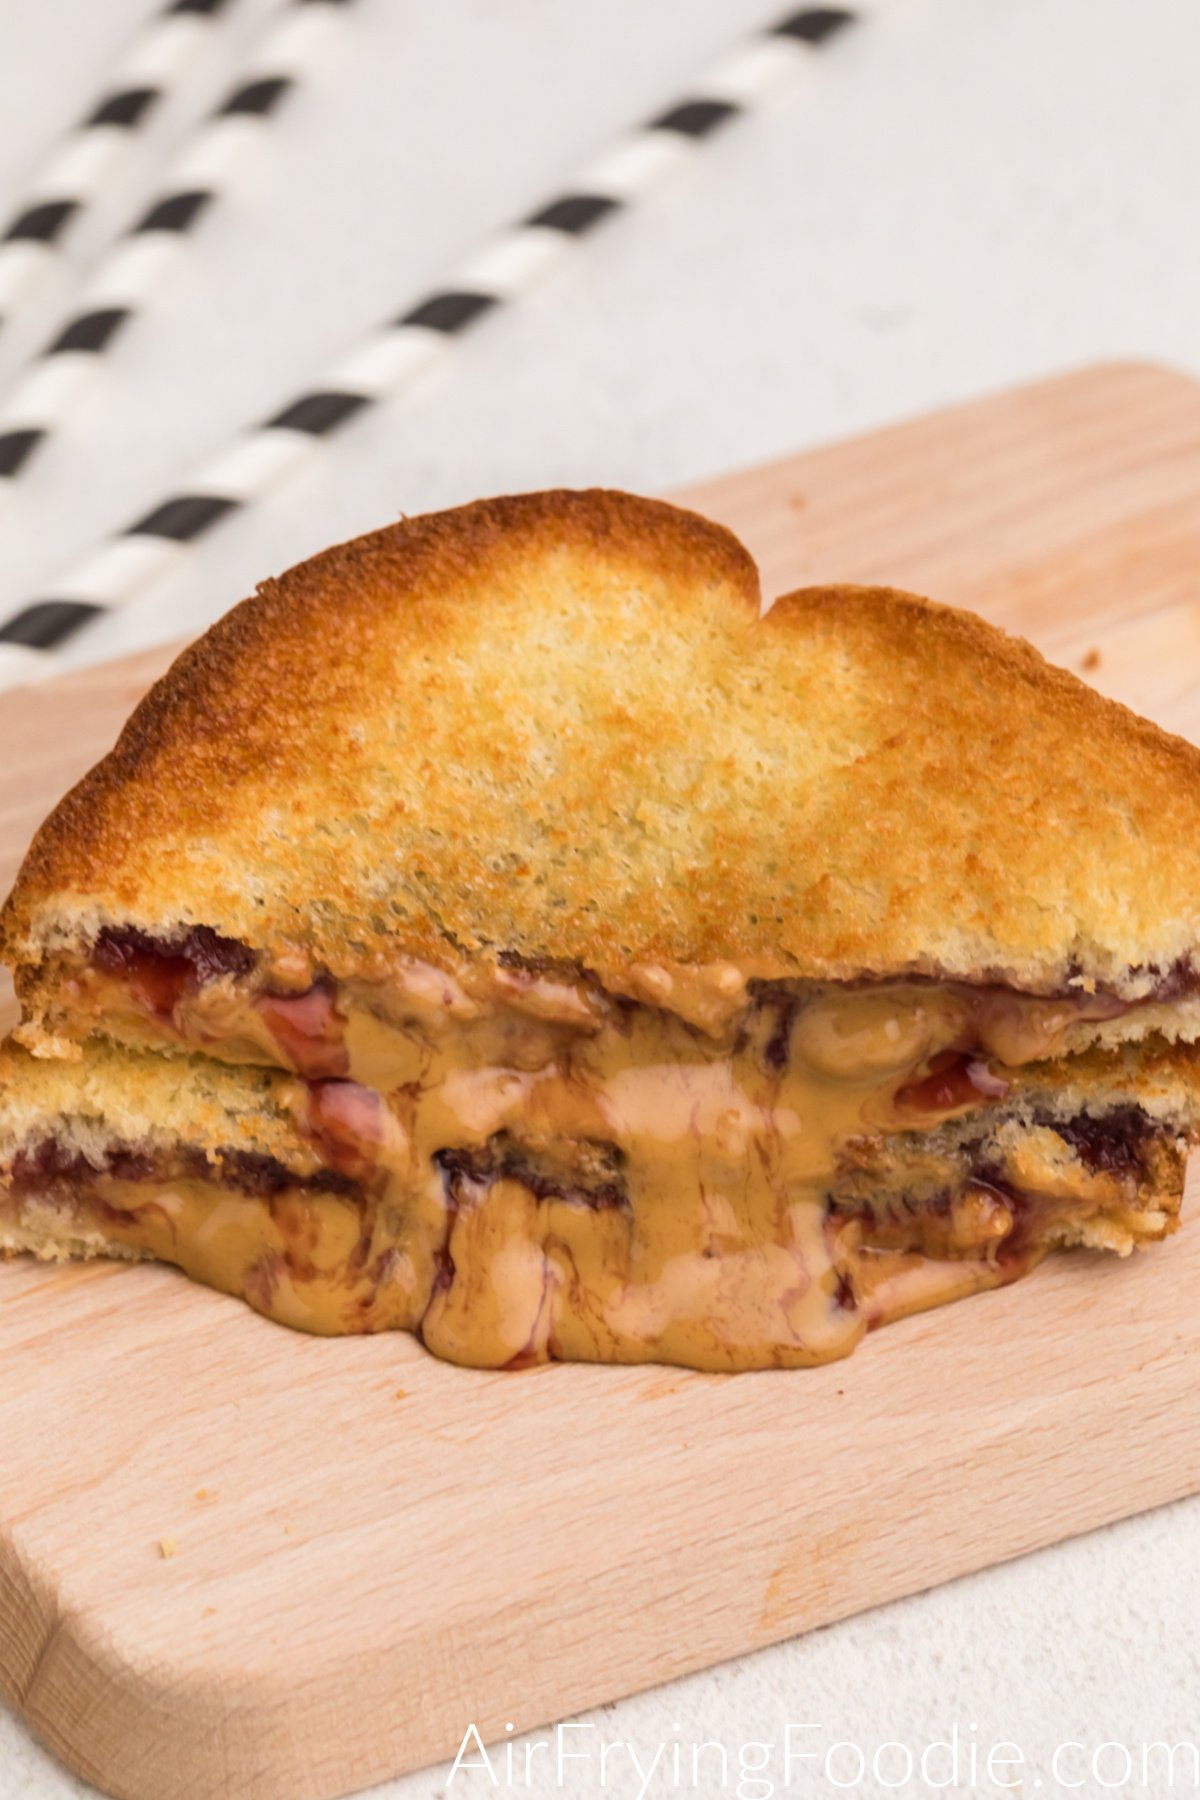 Fried peanut butter and jelly sandwich sliced in hald with melted peanut butter oozing out onto the cutting board.